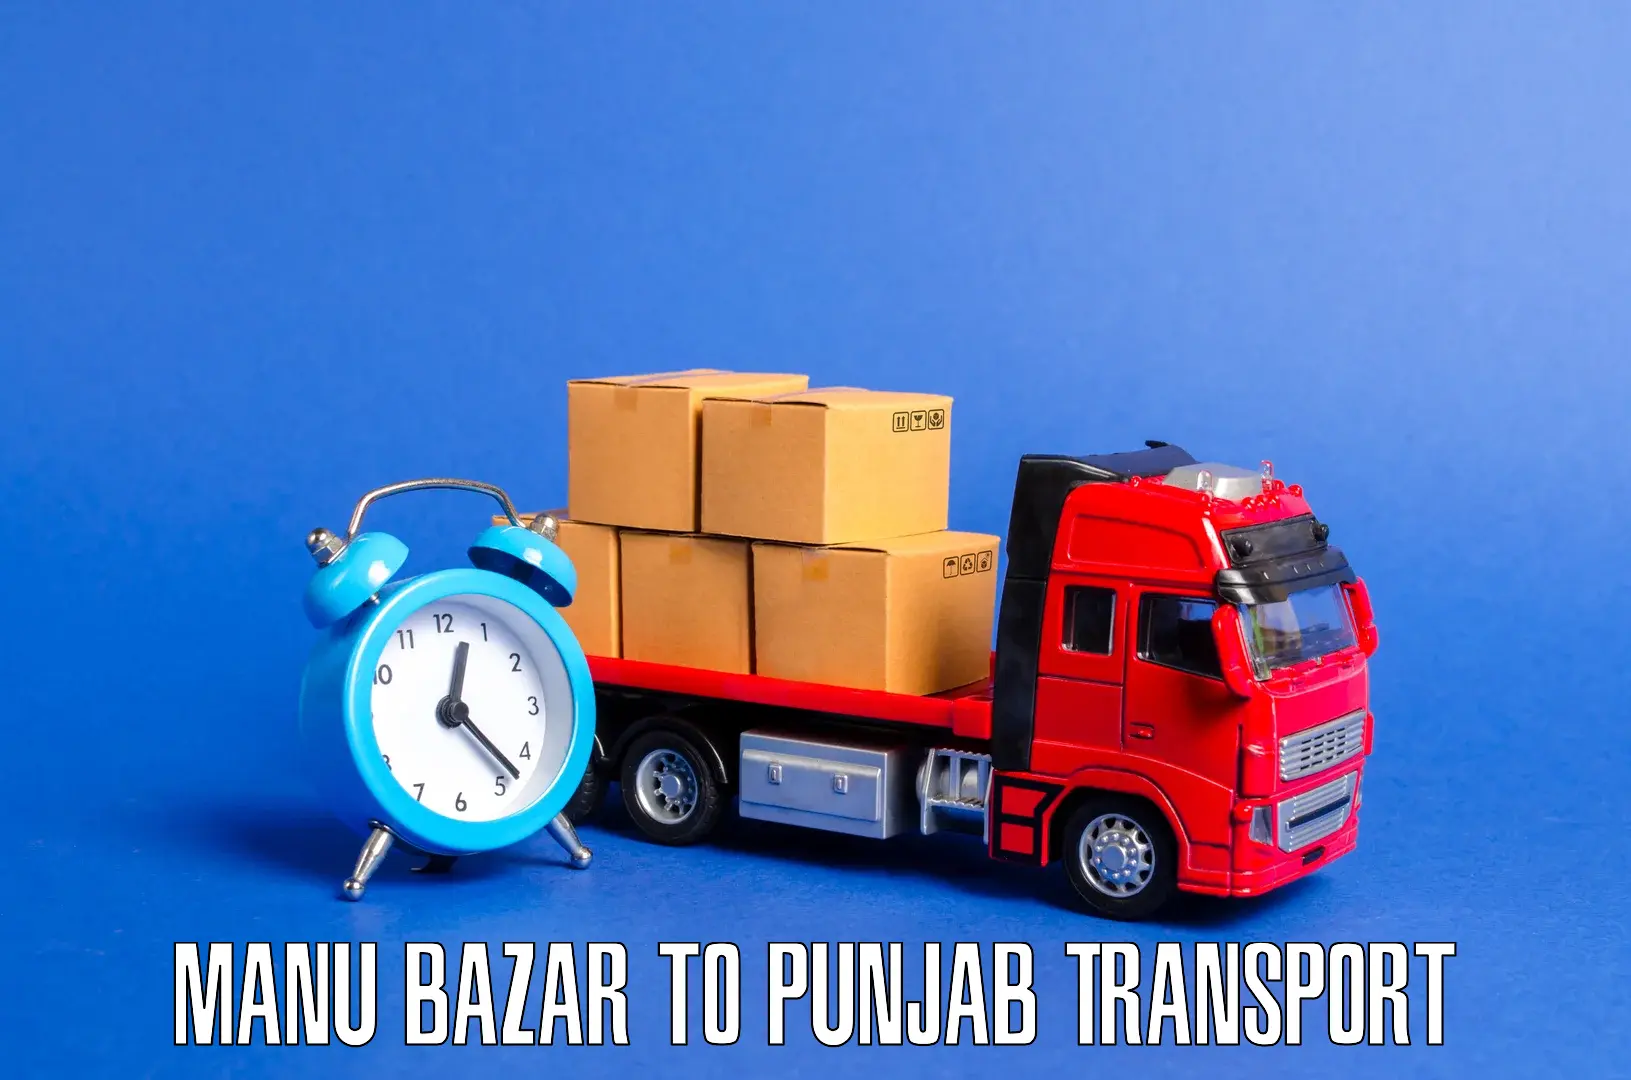 Transport bike from one state to another Manu Bazar to Jalandhar